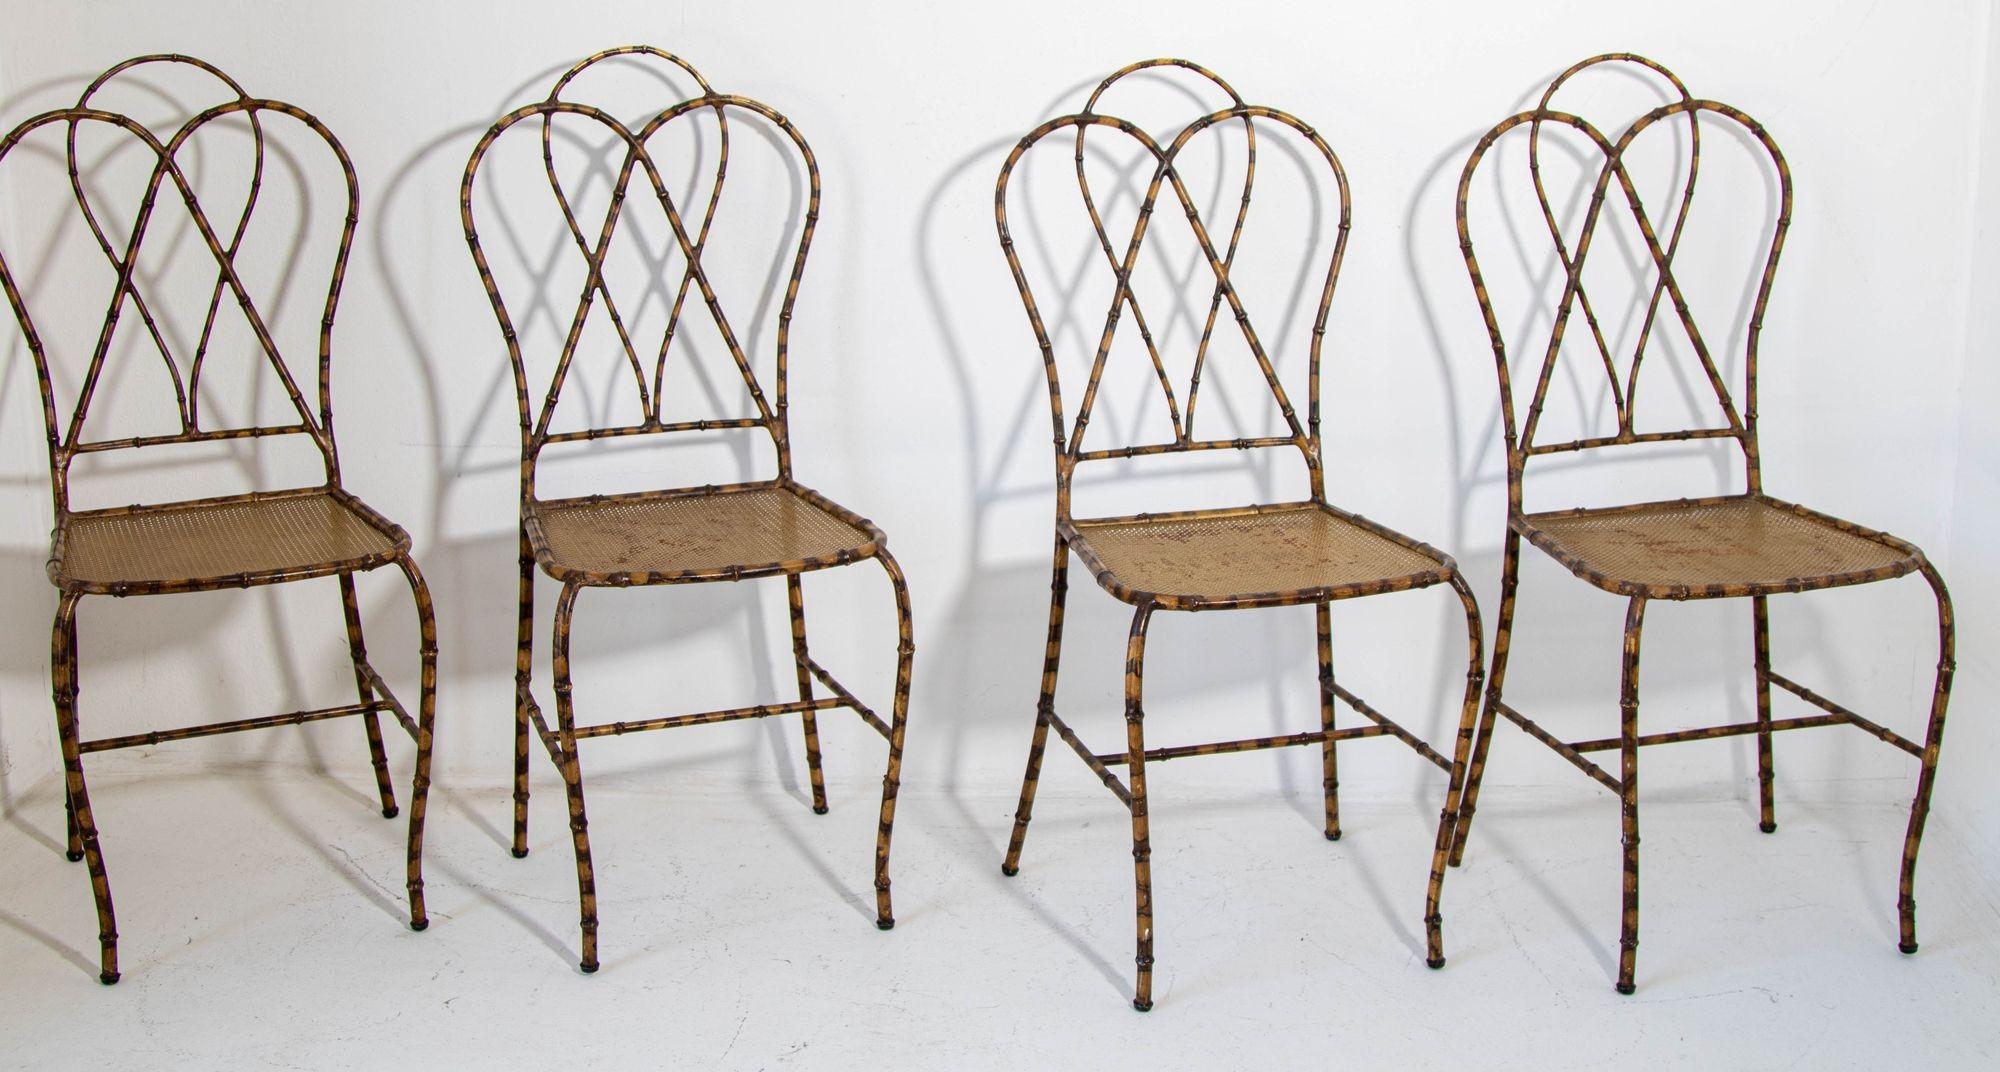 Italian Gilt Metal Faux Bamboo Dining Chairs 1950s Set of 4.
The listing is for the set of 4 chairs, we also have the matching table base if interested.
Set of Four arched Faux Bamboo Chairs in Gilt on brown metal,
Eye-catching 1950s Italian gilt